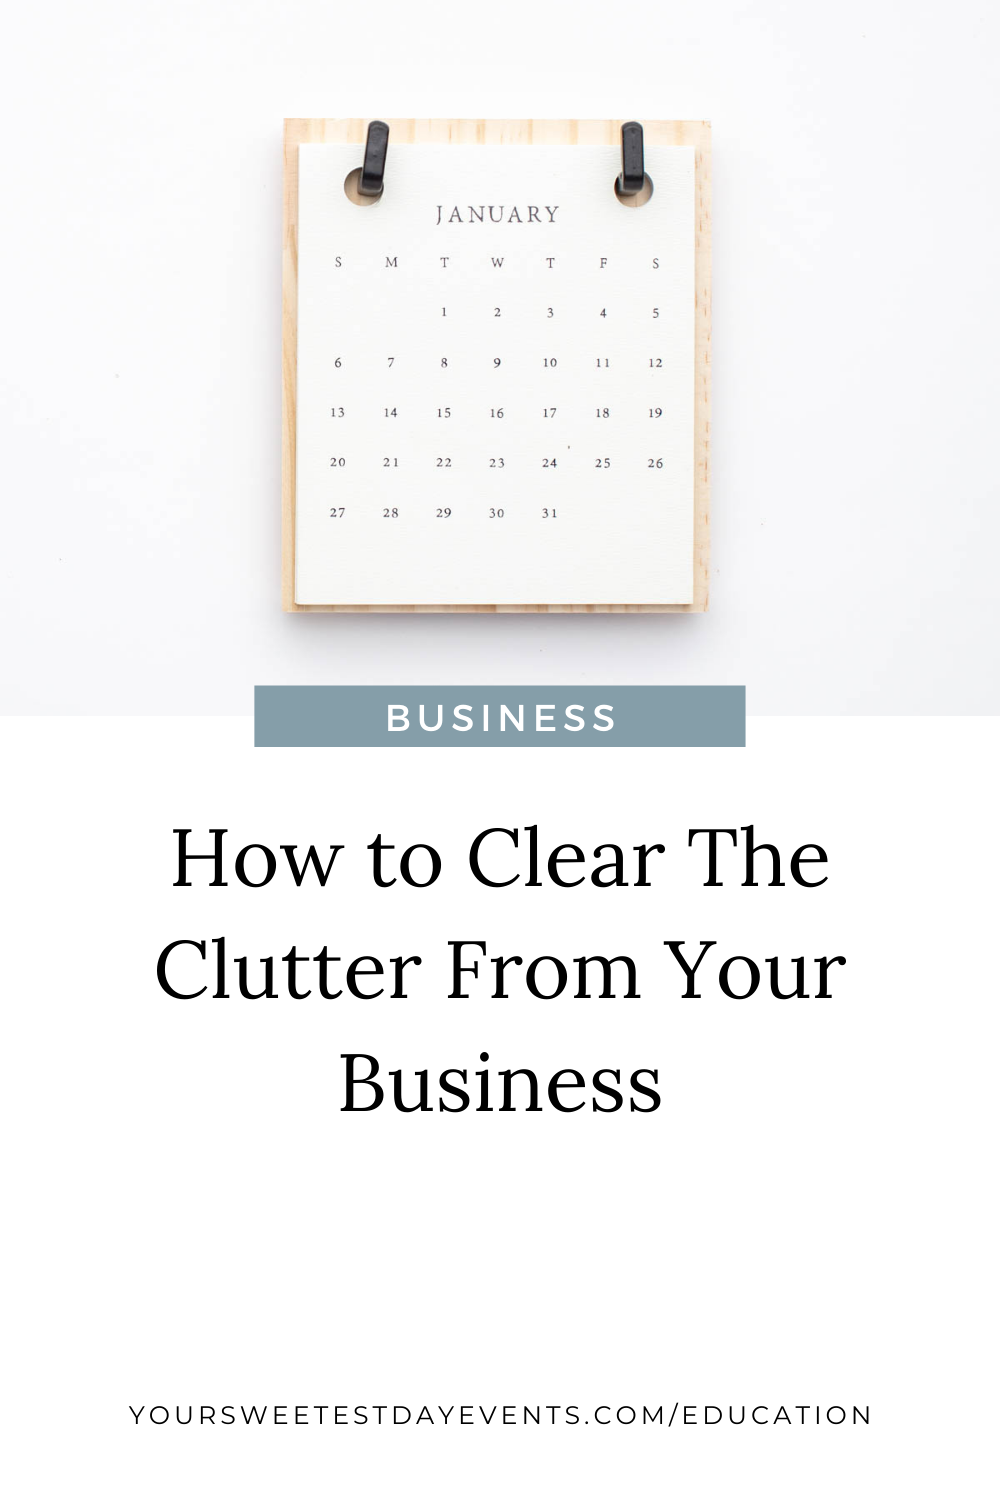 How to Clear the Clutter From Your Business - Your Systems